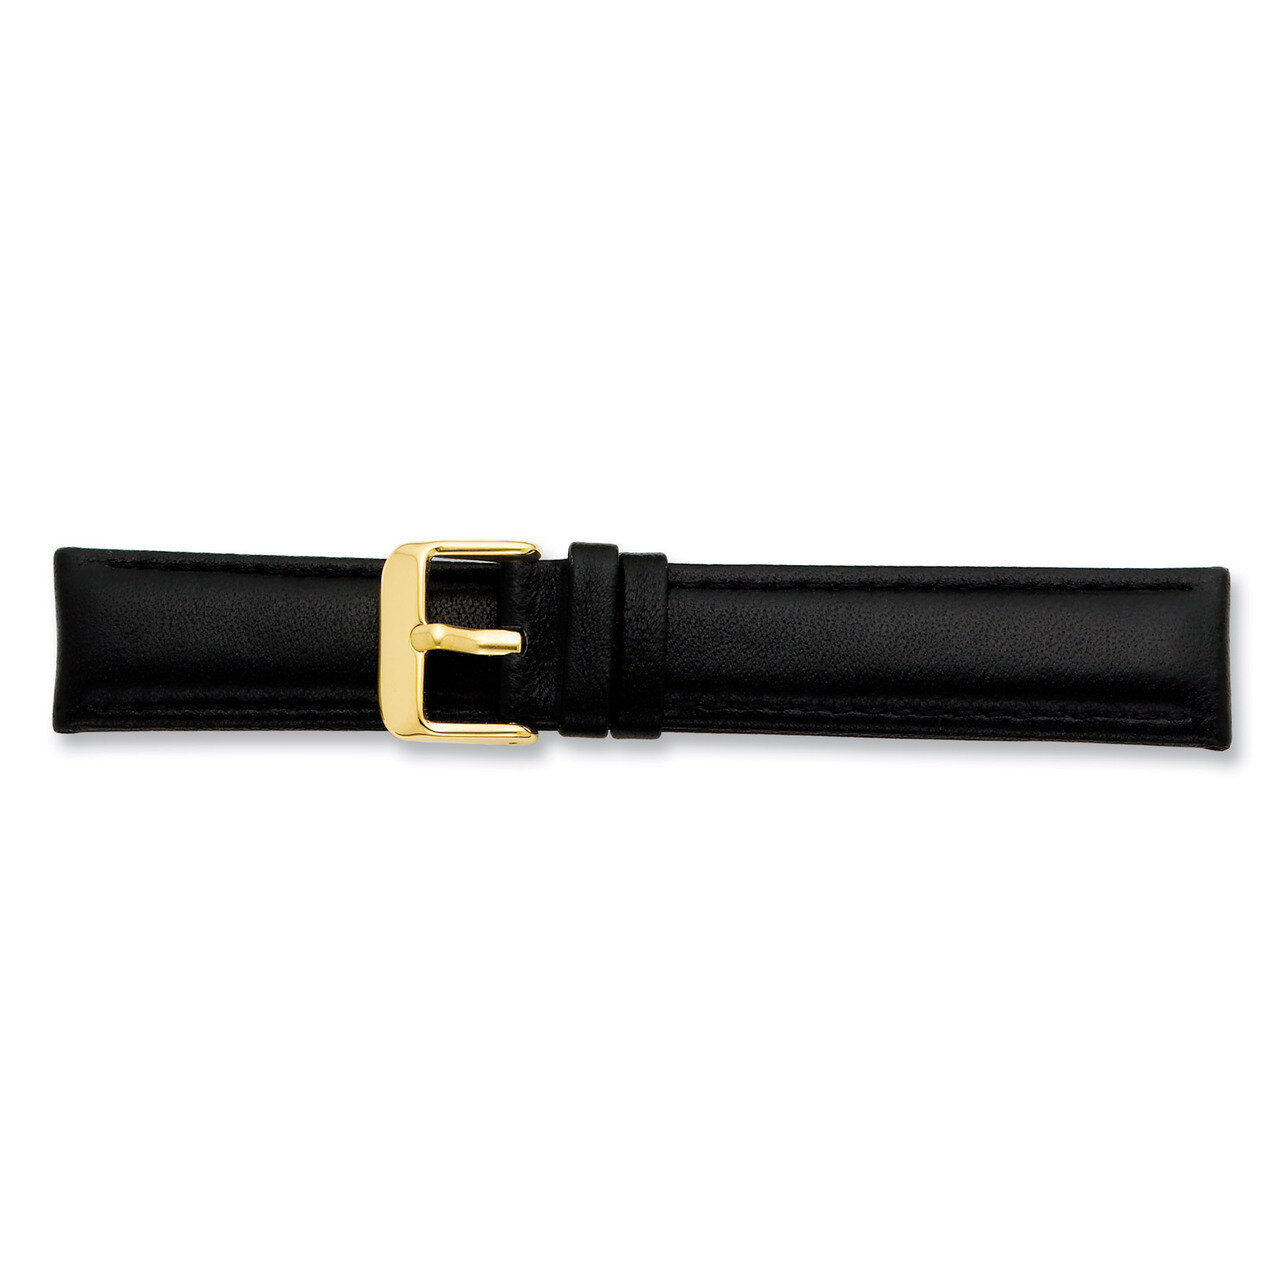 18mm Black Glove Leather Buckle Watch Band 7.75 Inch Gold-tone BA195-18